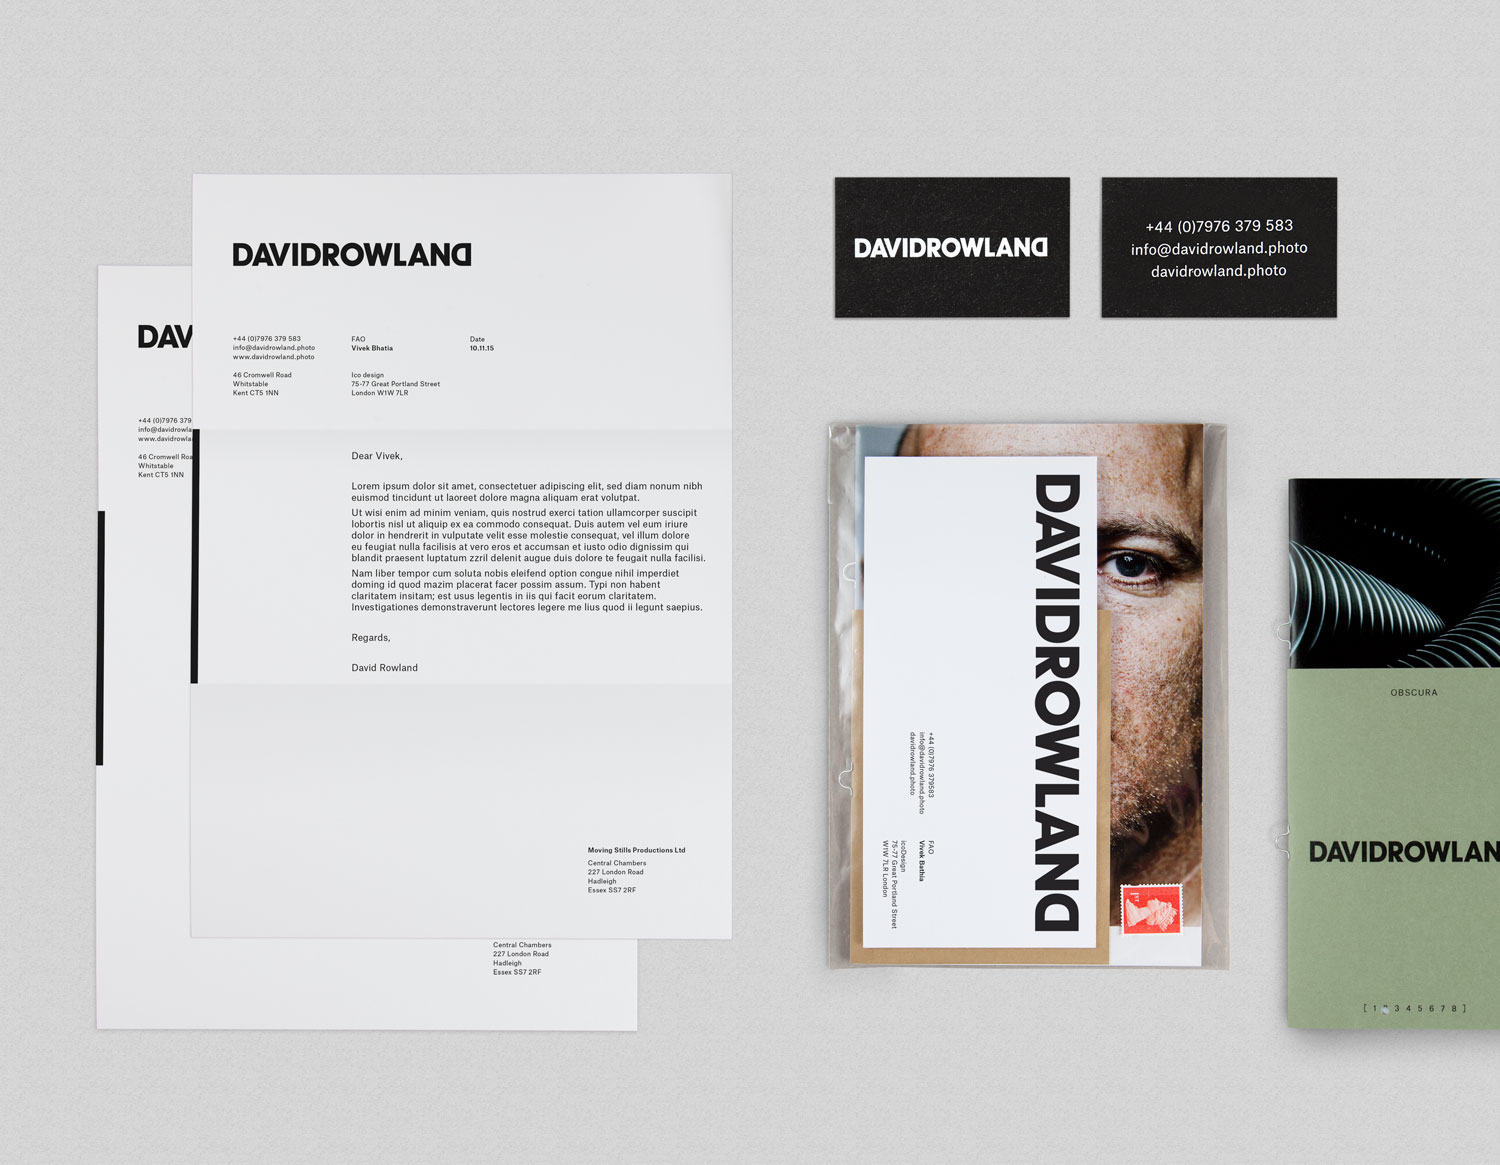 Brand identity, headed paper, business cards and lookbook by London-based graphic design studio ico Design for photographer David Rowland